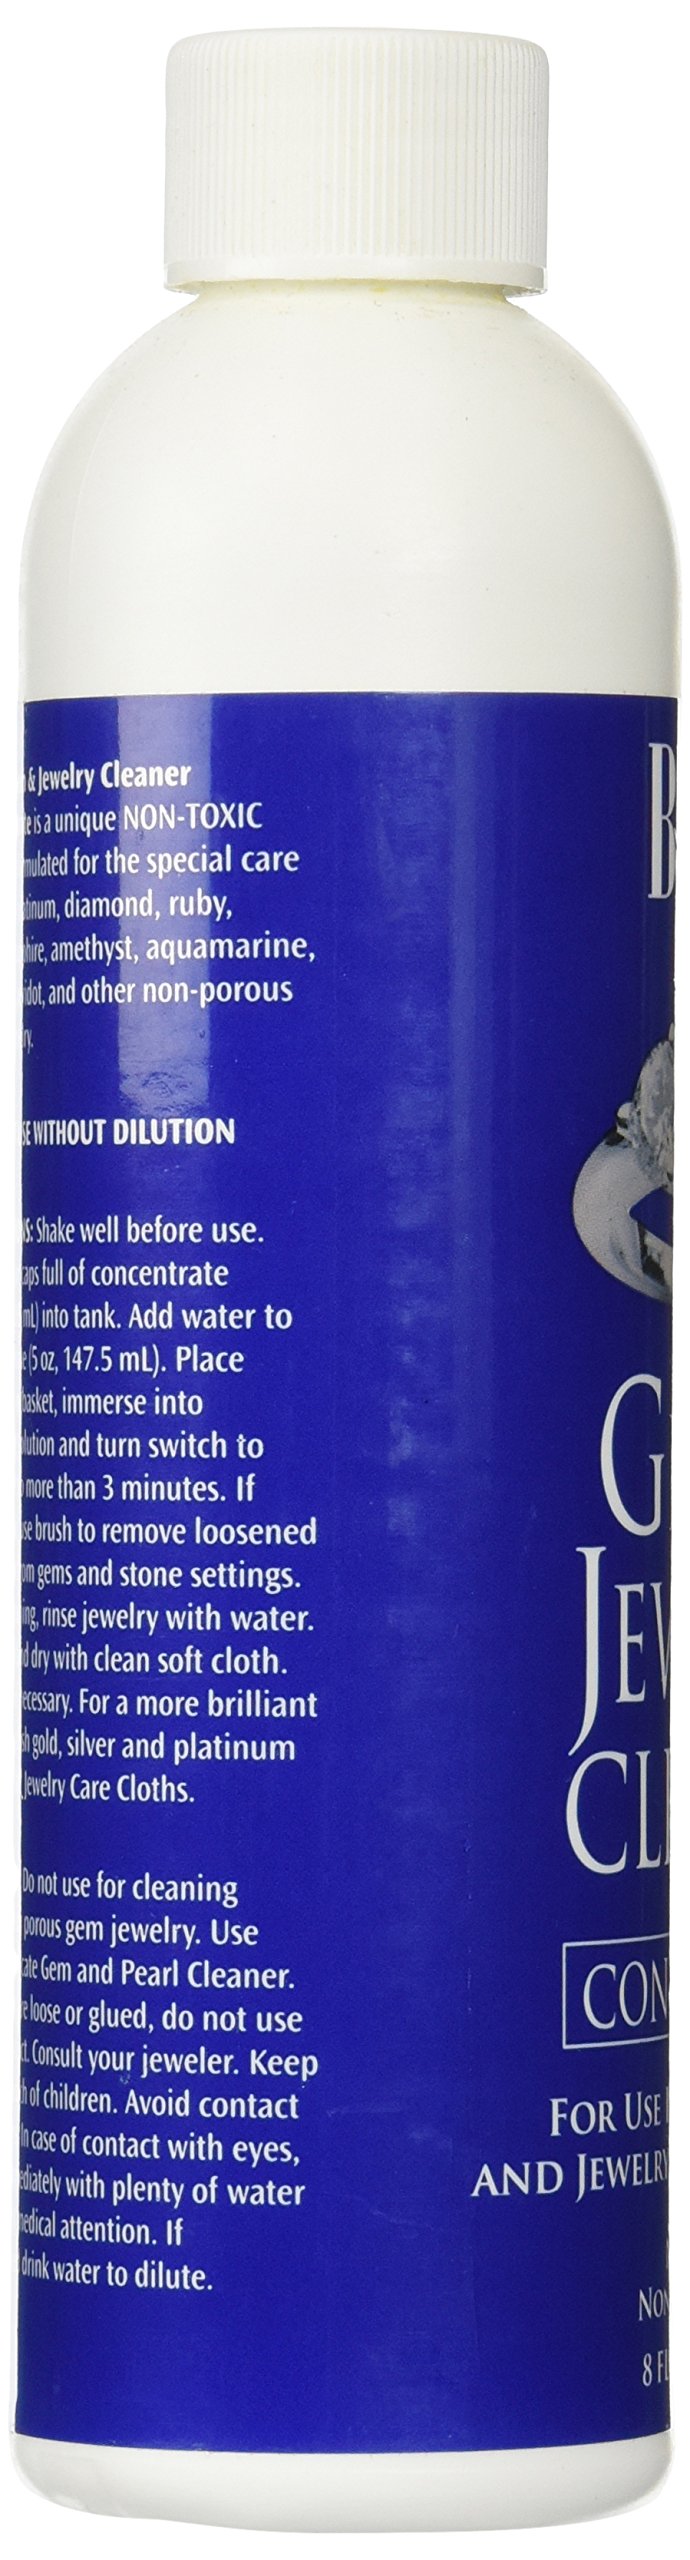 Blitz 653 Gem & Jewelry Non-Toxic Cleaner Concentrate for use in Cleaning Machines, 8 Ounces, 2-Pack